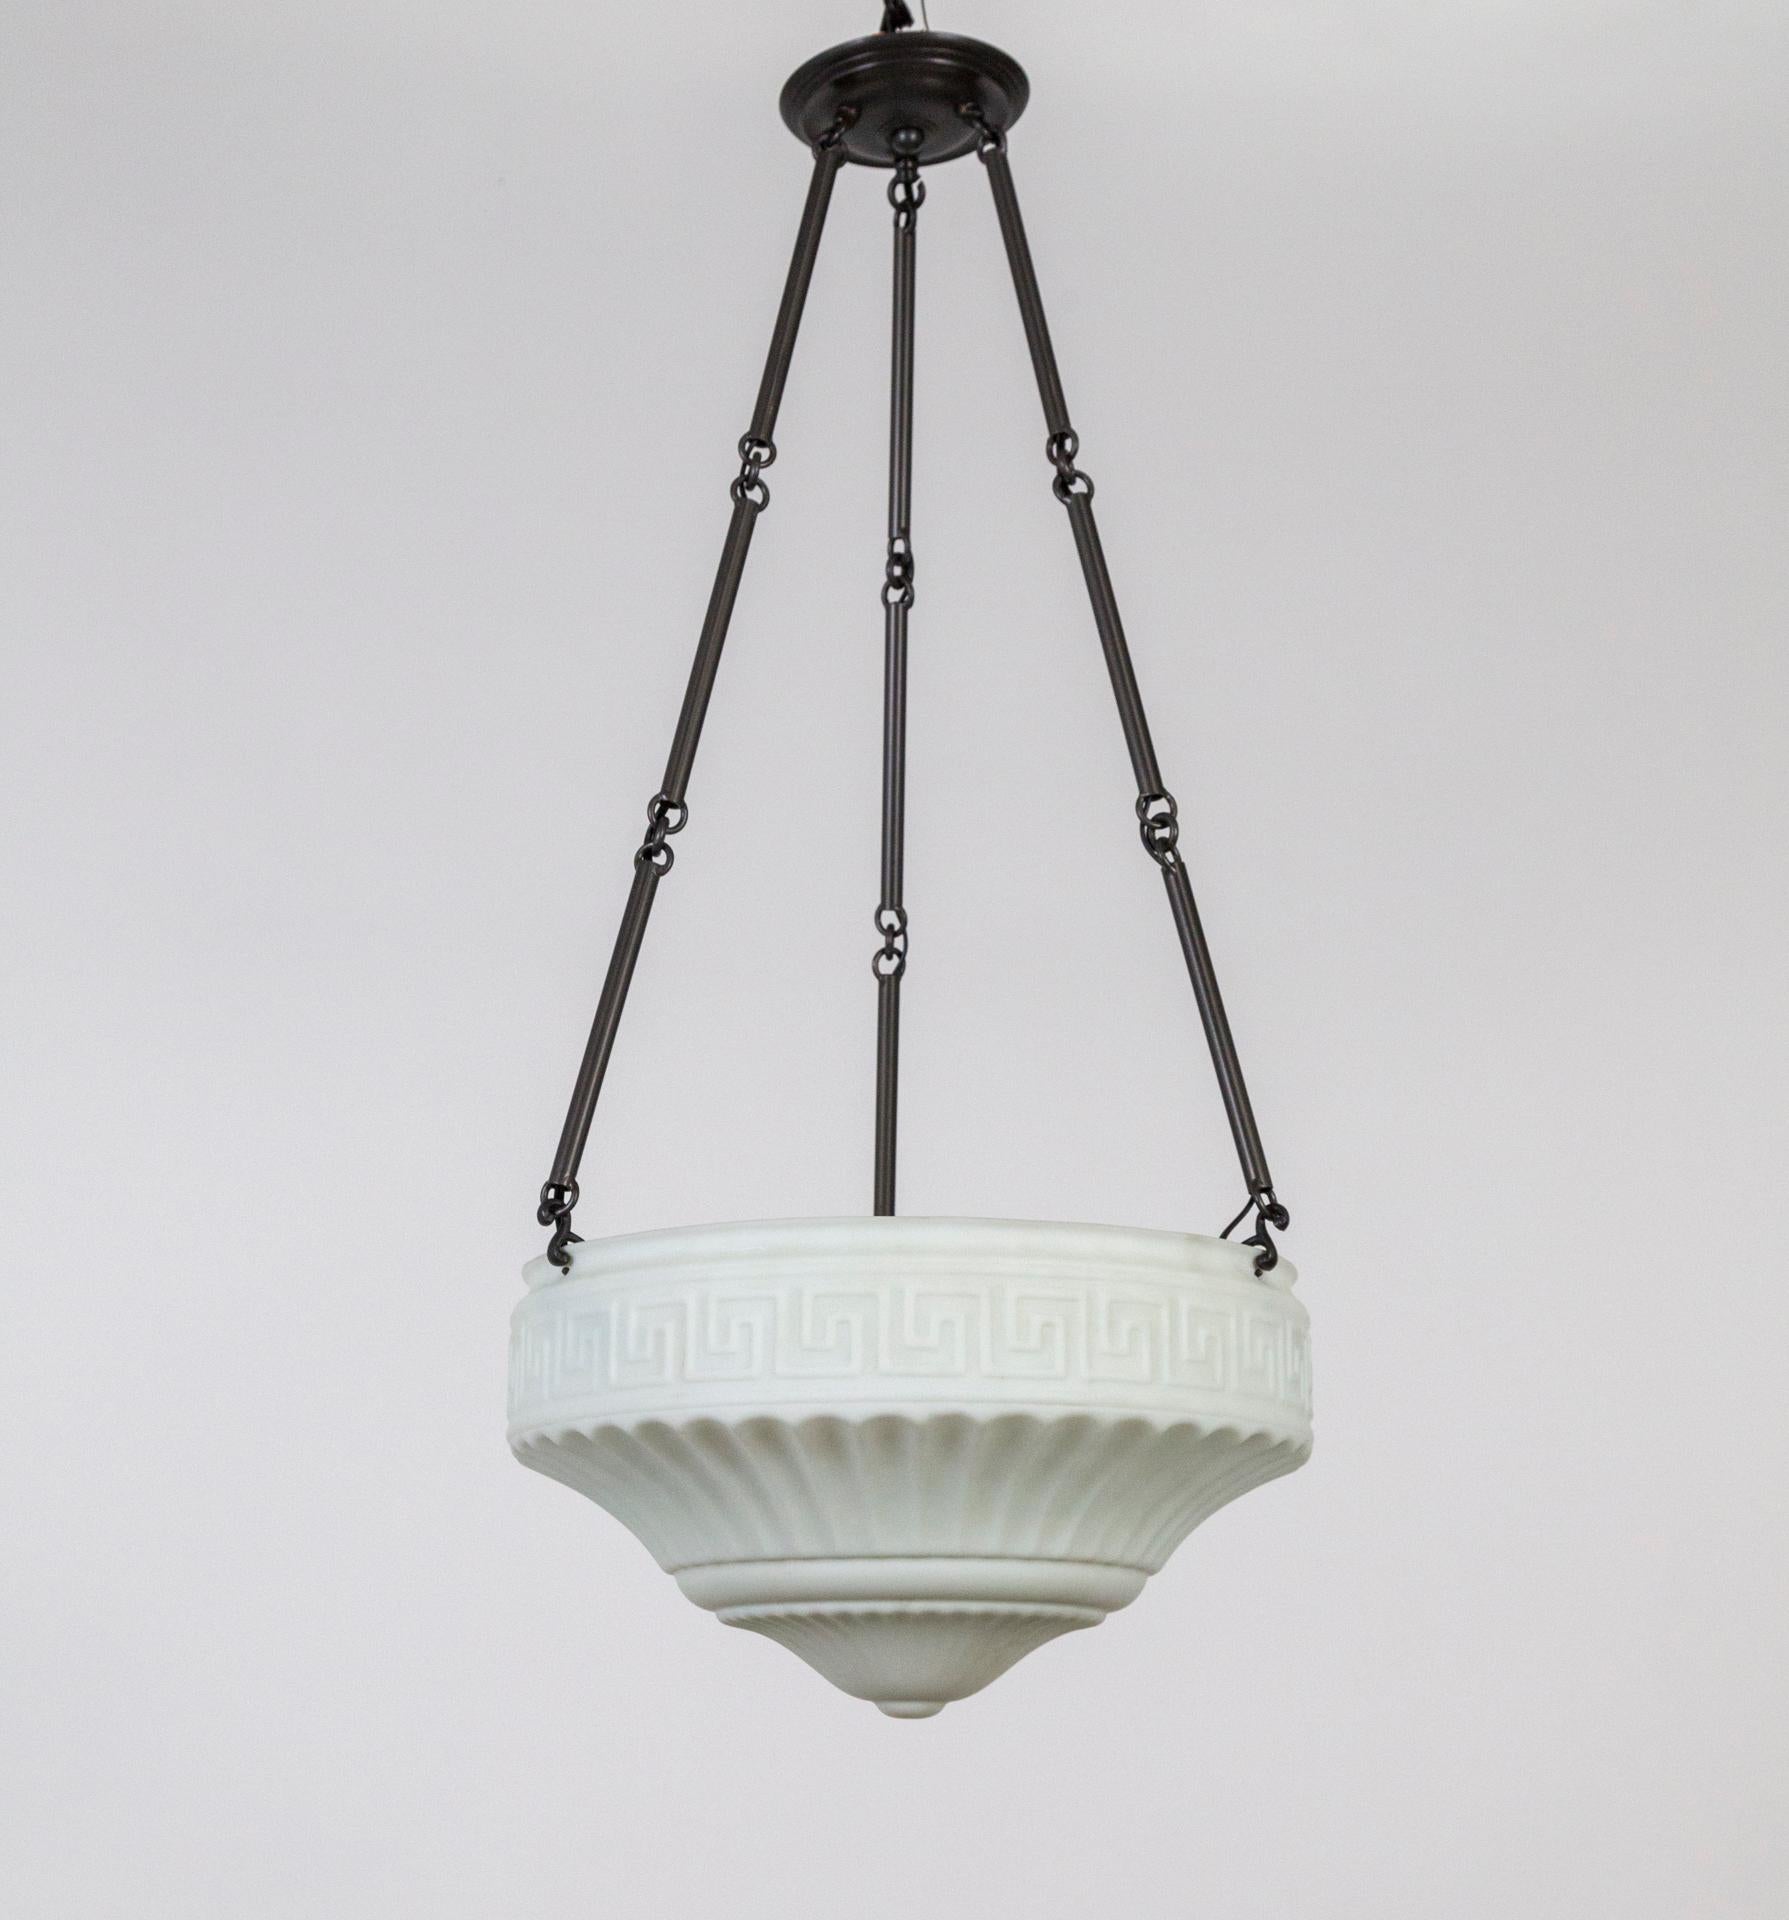 An Art Deco, molded, matte milk glass shade; etched with a Greek key motif and shaped with decorative grooves in a radial form. Three black tinted brass stems hold it to the canopy. 3 medium base sockets. Measures: 35.5” height x 16” diameter.